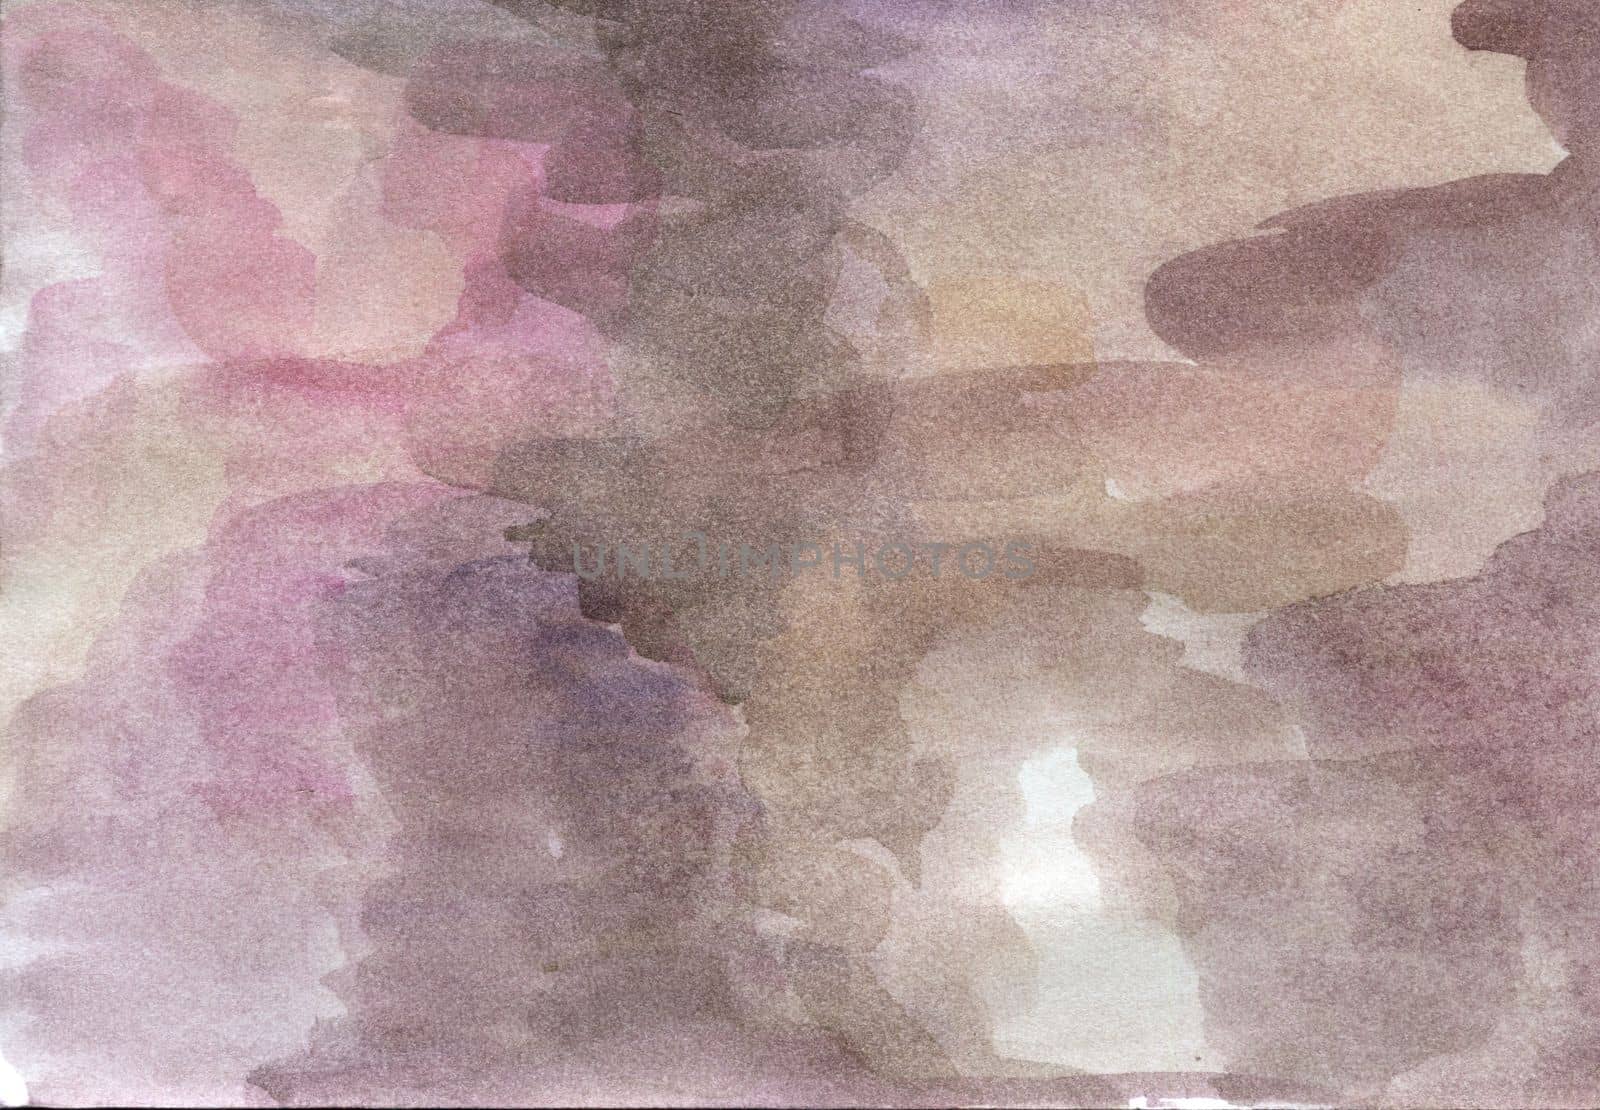 Soft Pink hand-drawn watercolor background by Dustick